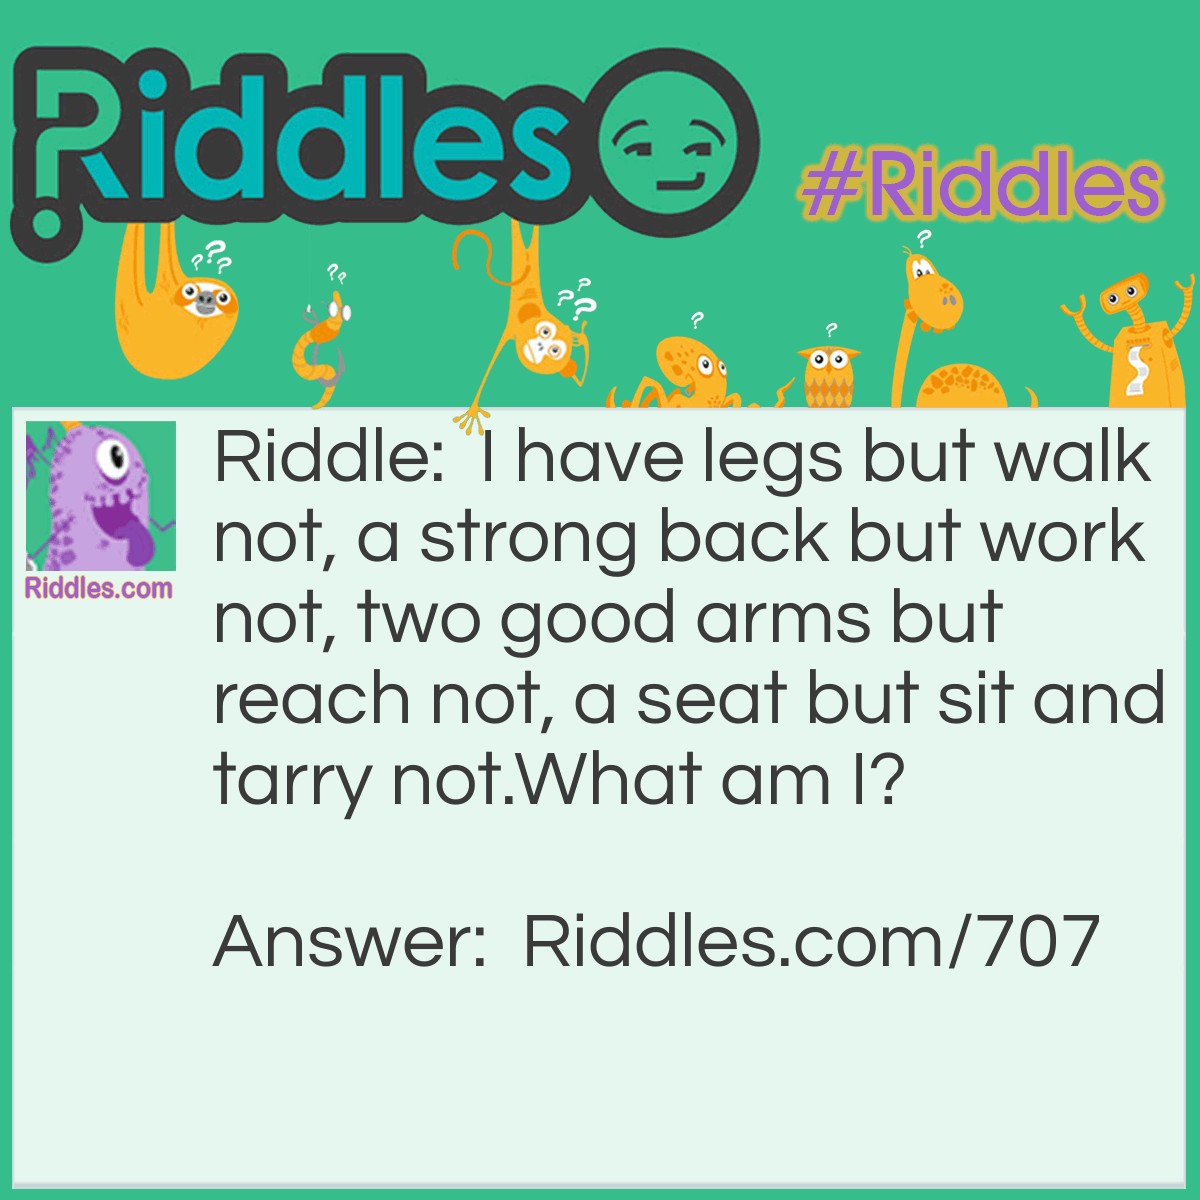 Riddle: I have legs but walk not, a strong back but work not, two good arms but reach not, a seat but sit and tarry not. 
What am I? Answer: An Armchair.